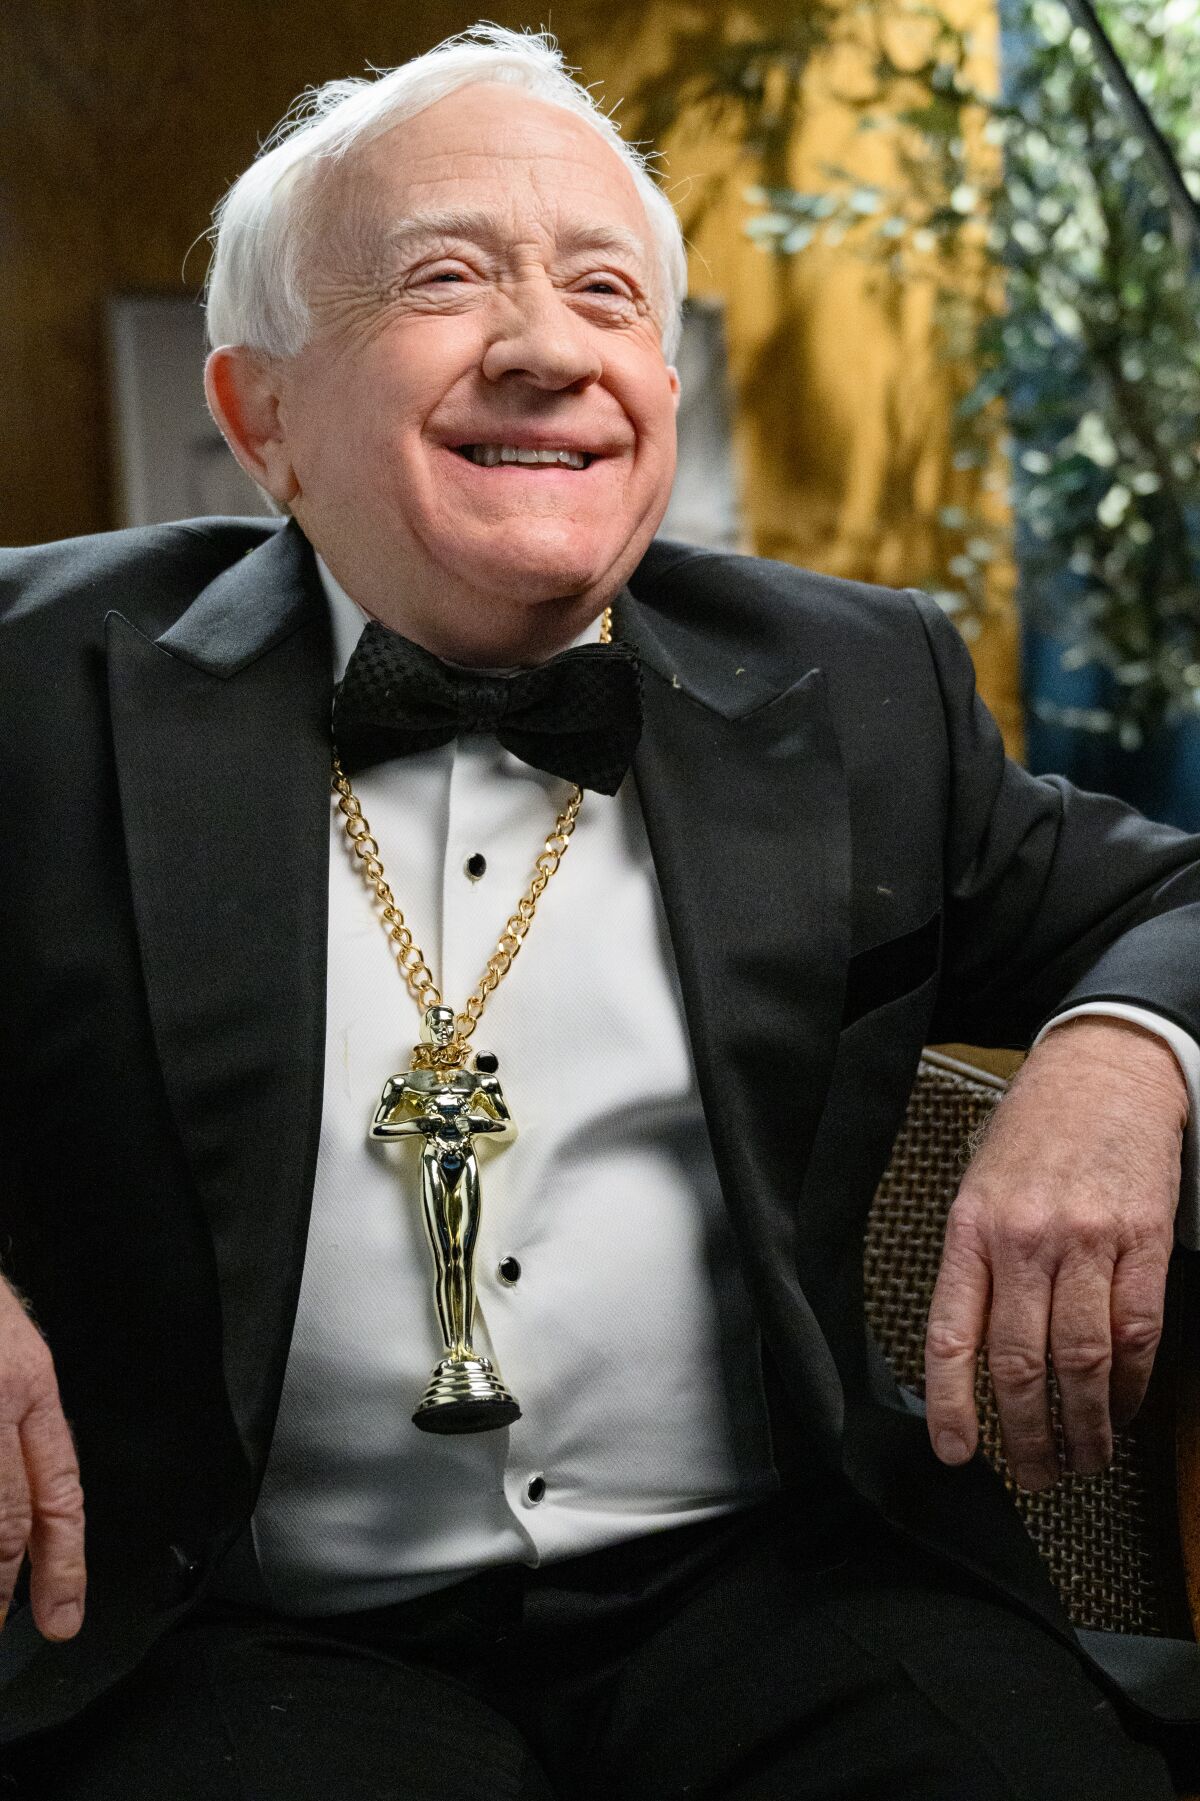 A man in a tuxedo wears a necklace with an Oscars statuette.